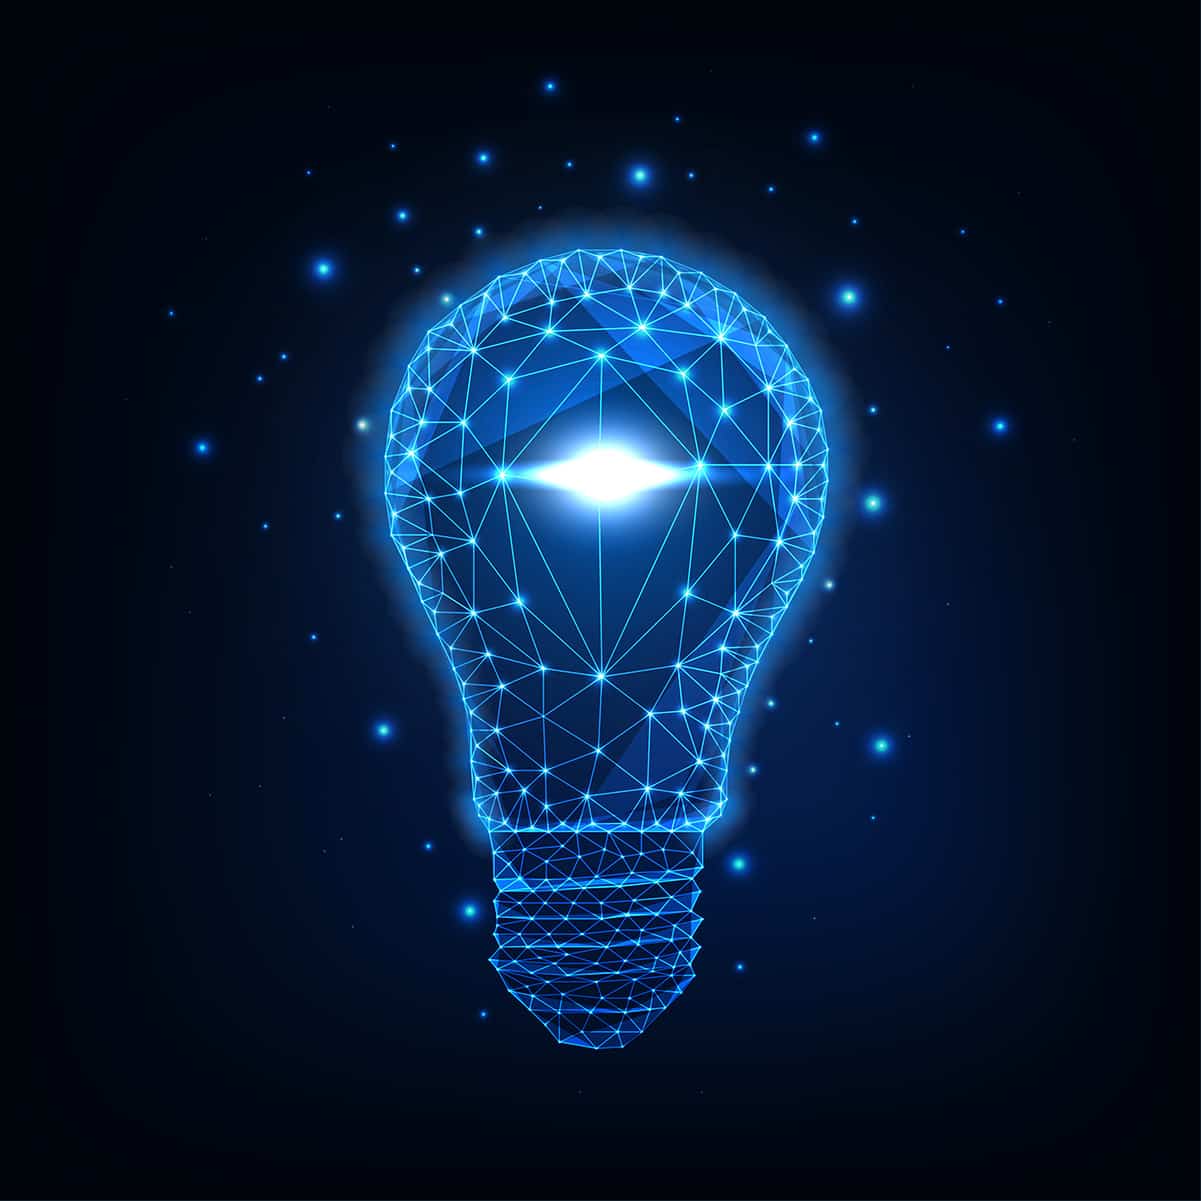 The branding or our consultancy offerings is depicted by this blue vector image of a light bulb.